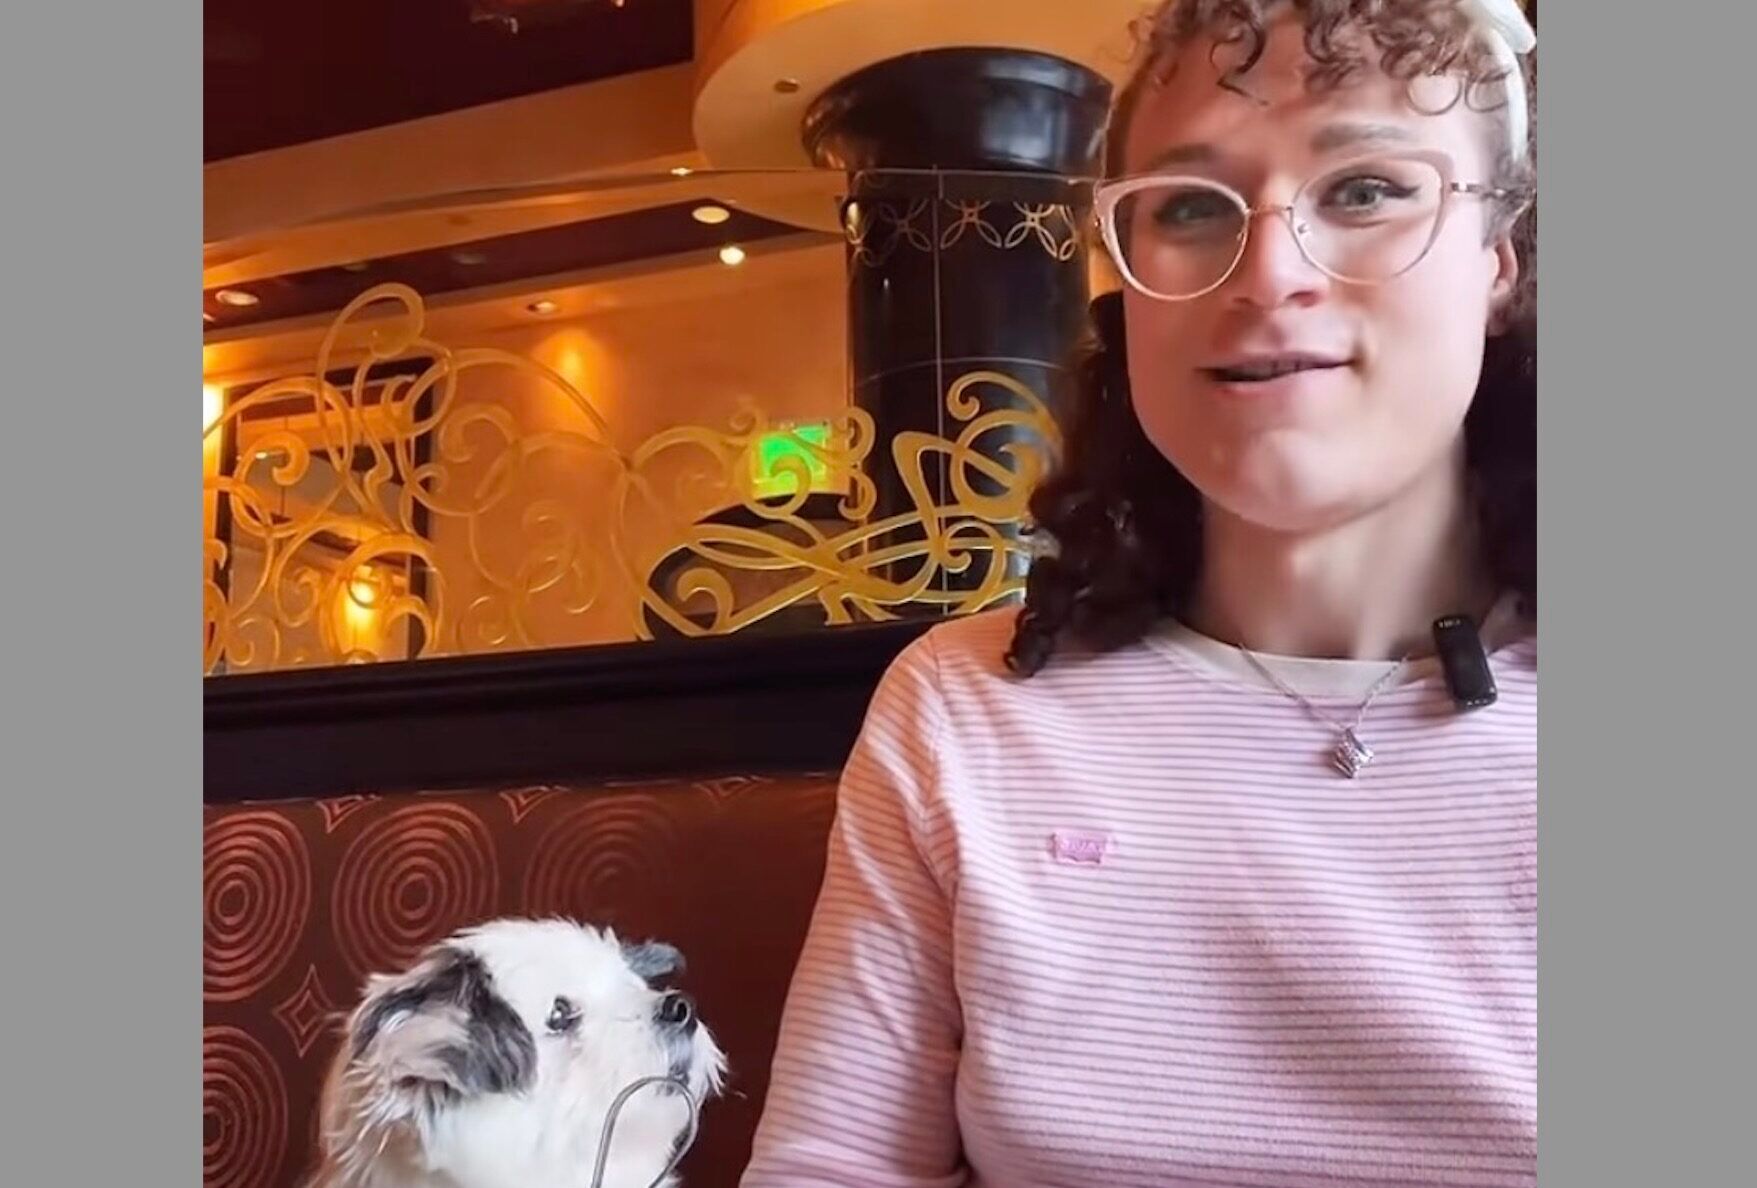 Lilly Contino and her dog harrassed by TERF at Cheesecake Factory